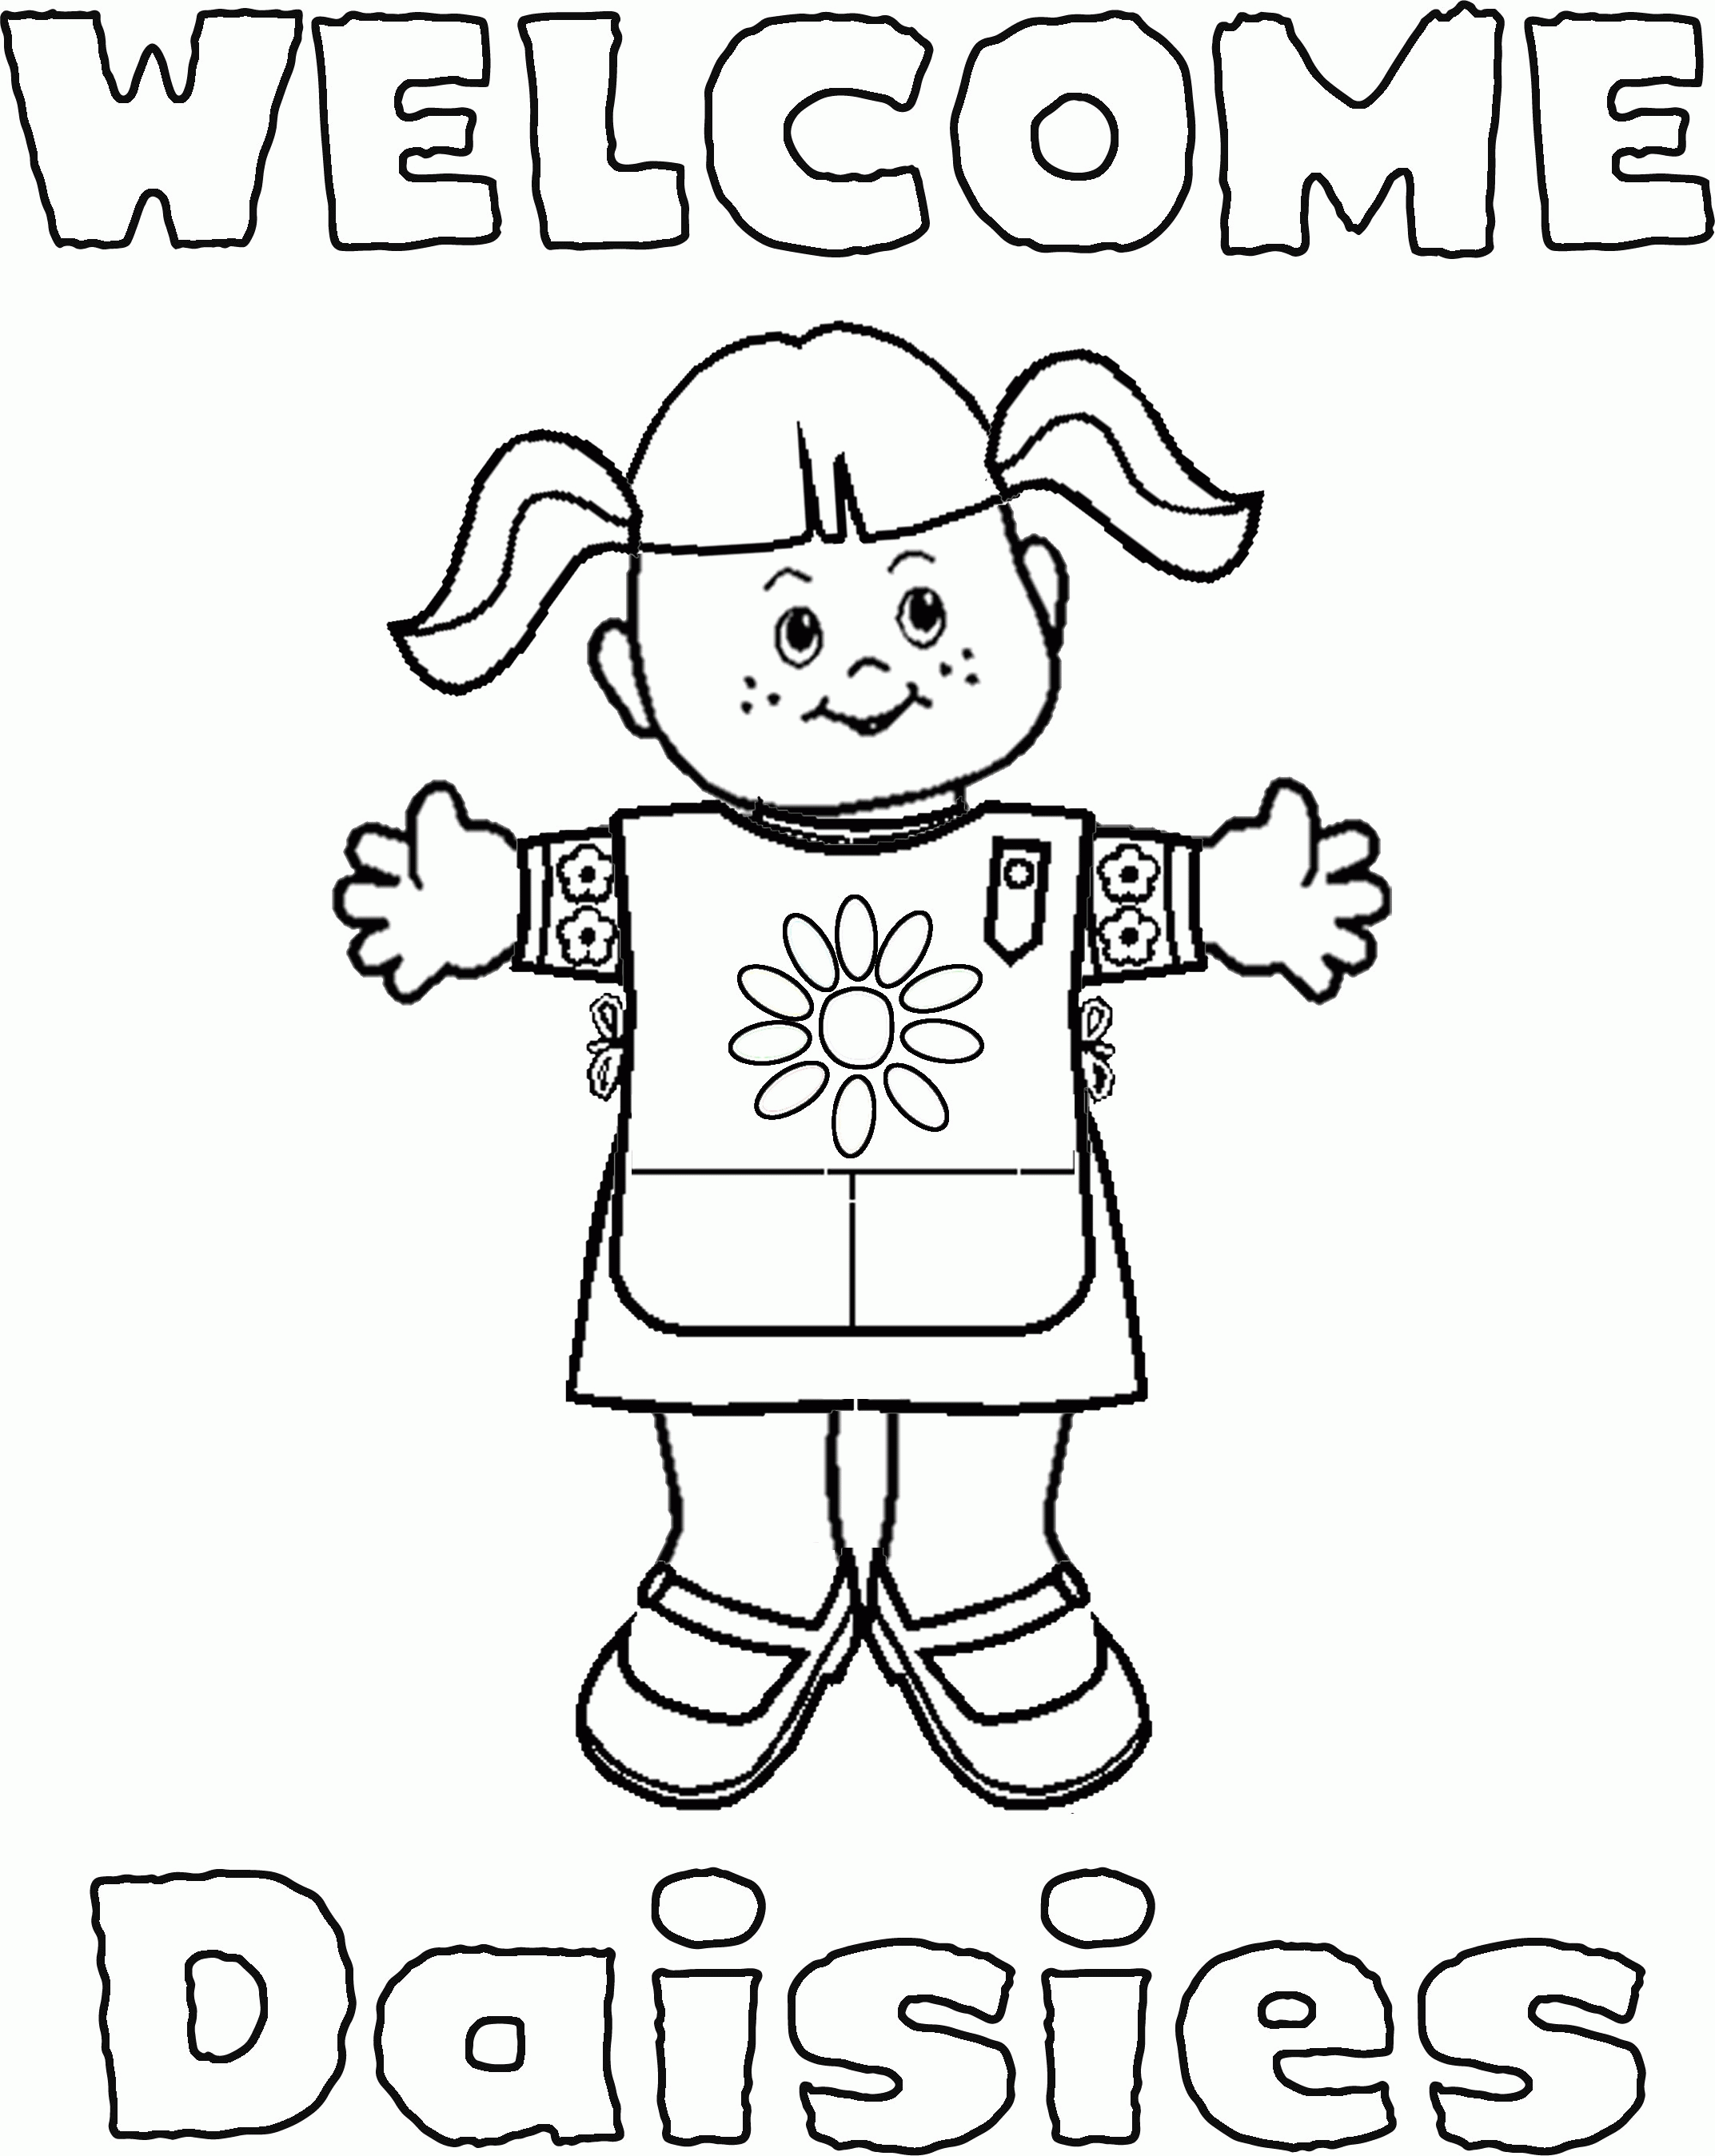 coloring page for daisy girl scouts - Clip Art Library